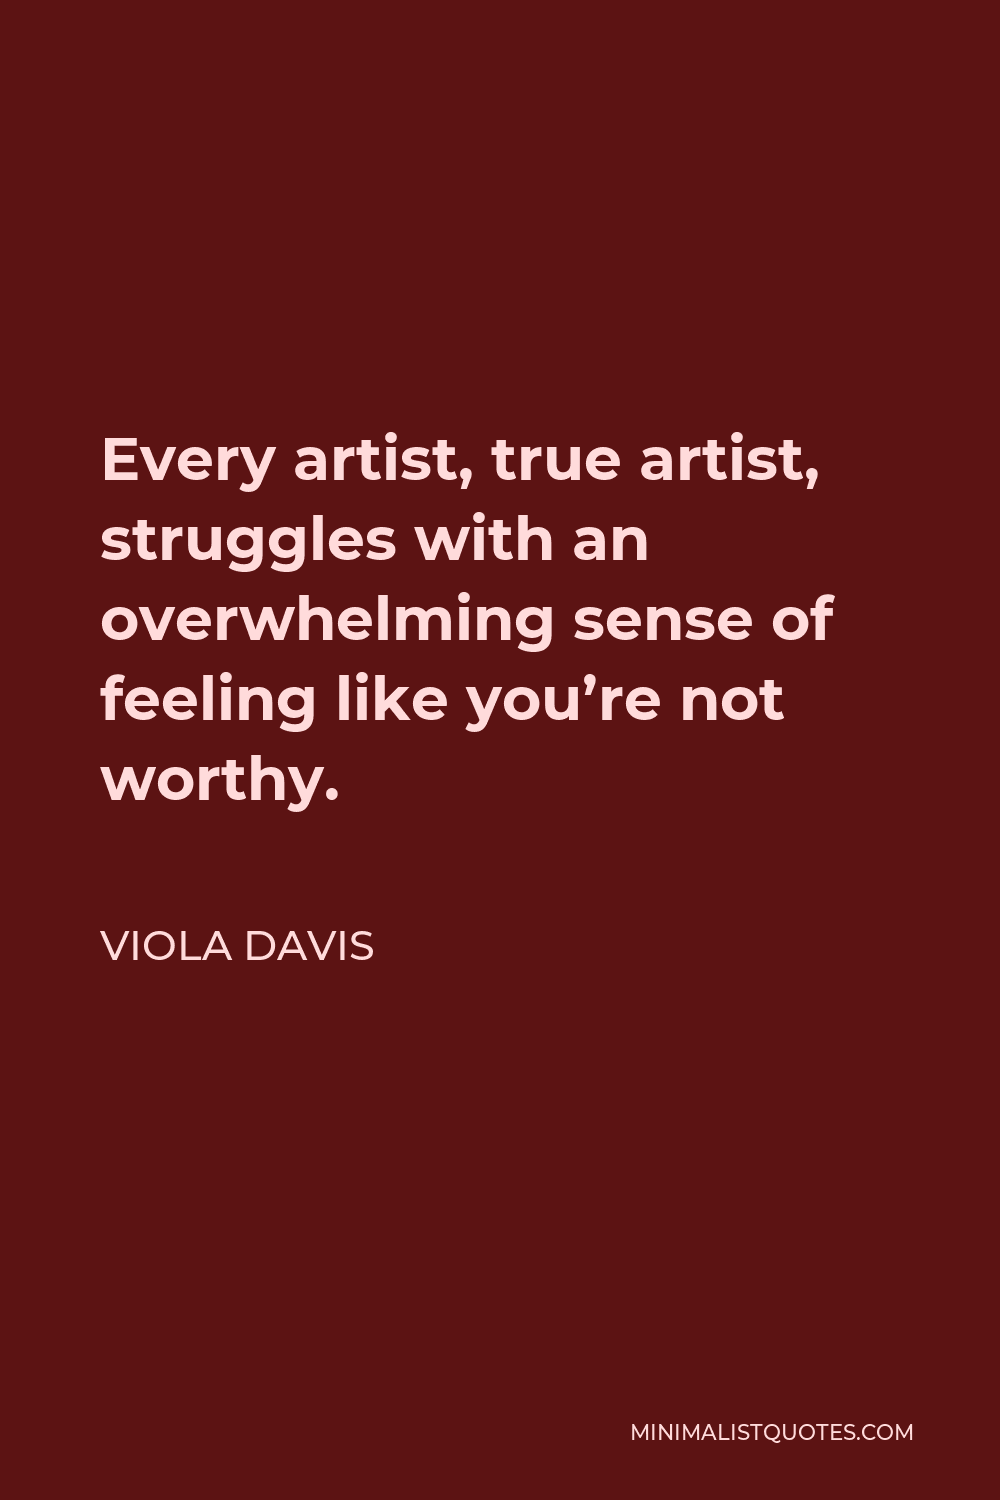 Viola Davis Quote - Every artist, true artist, struggles with an overwhelming sense of feeling like you’re not worthy.